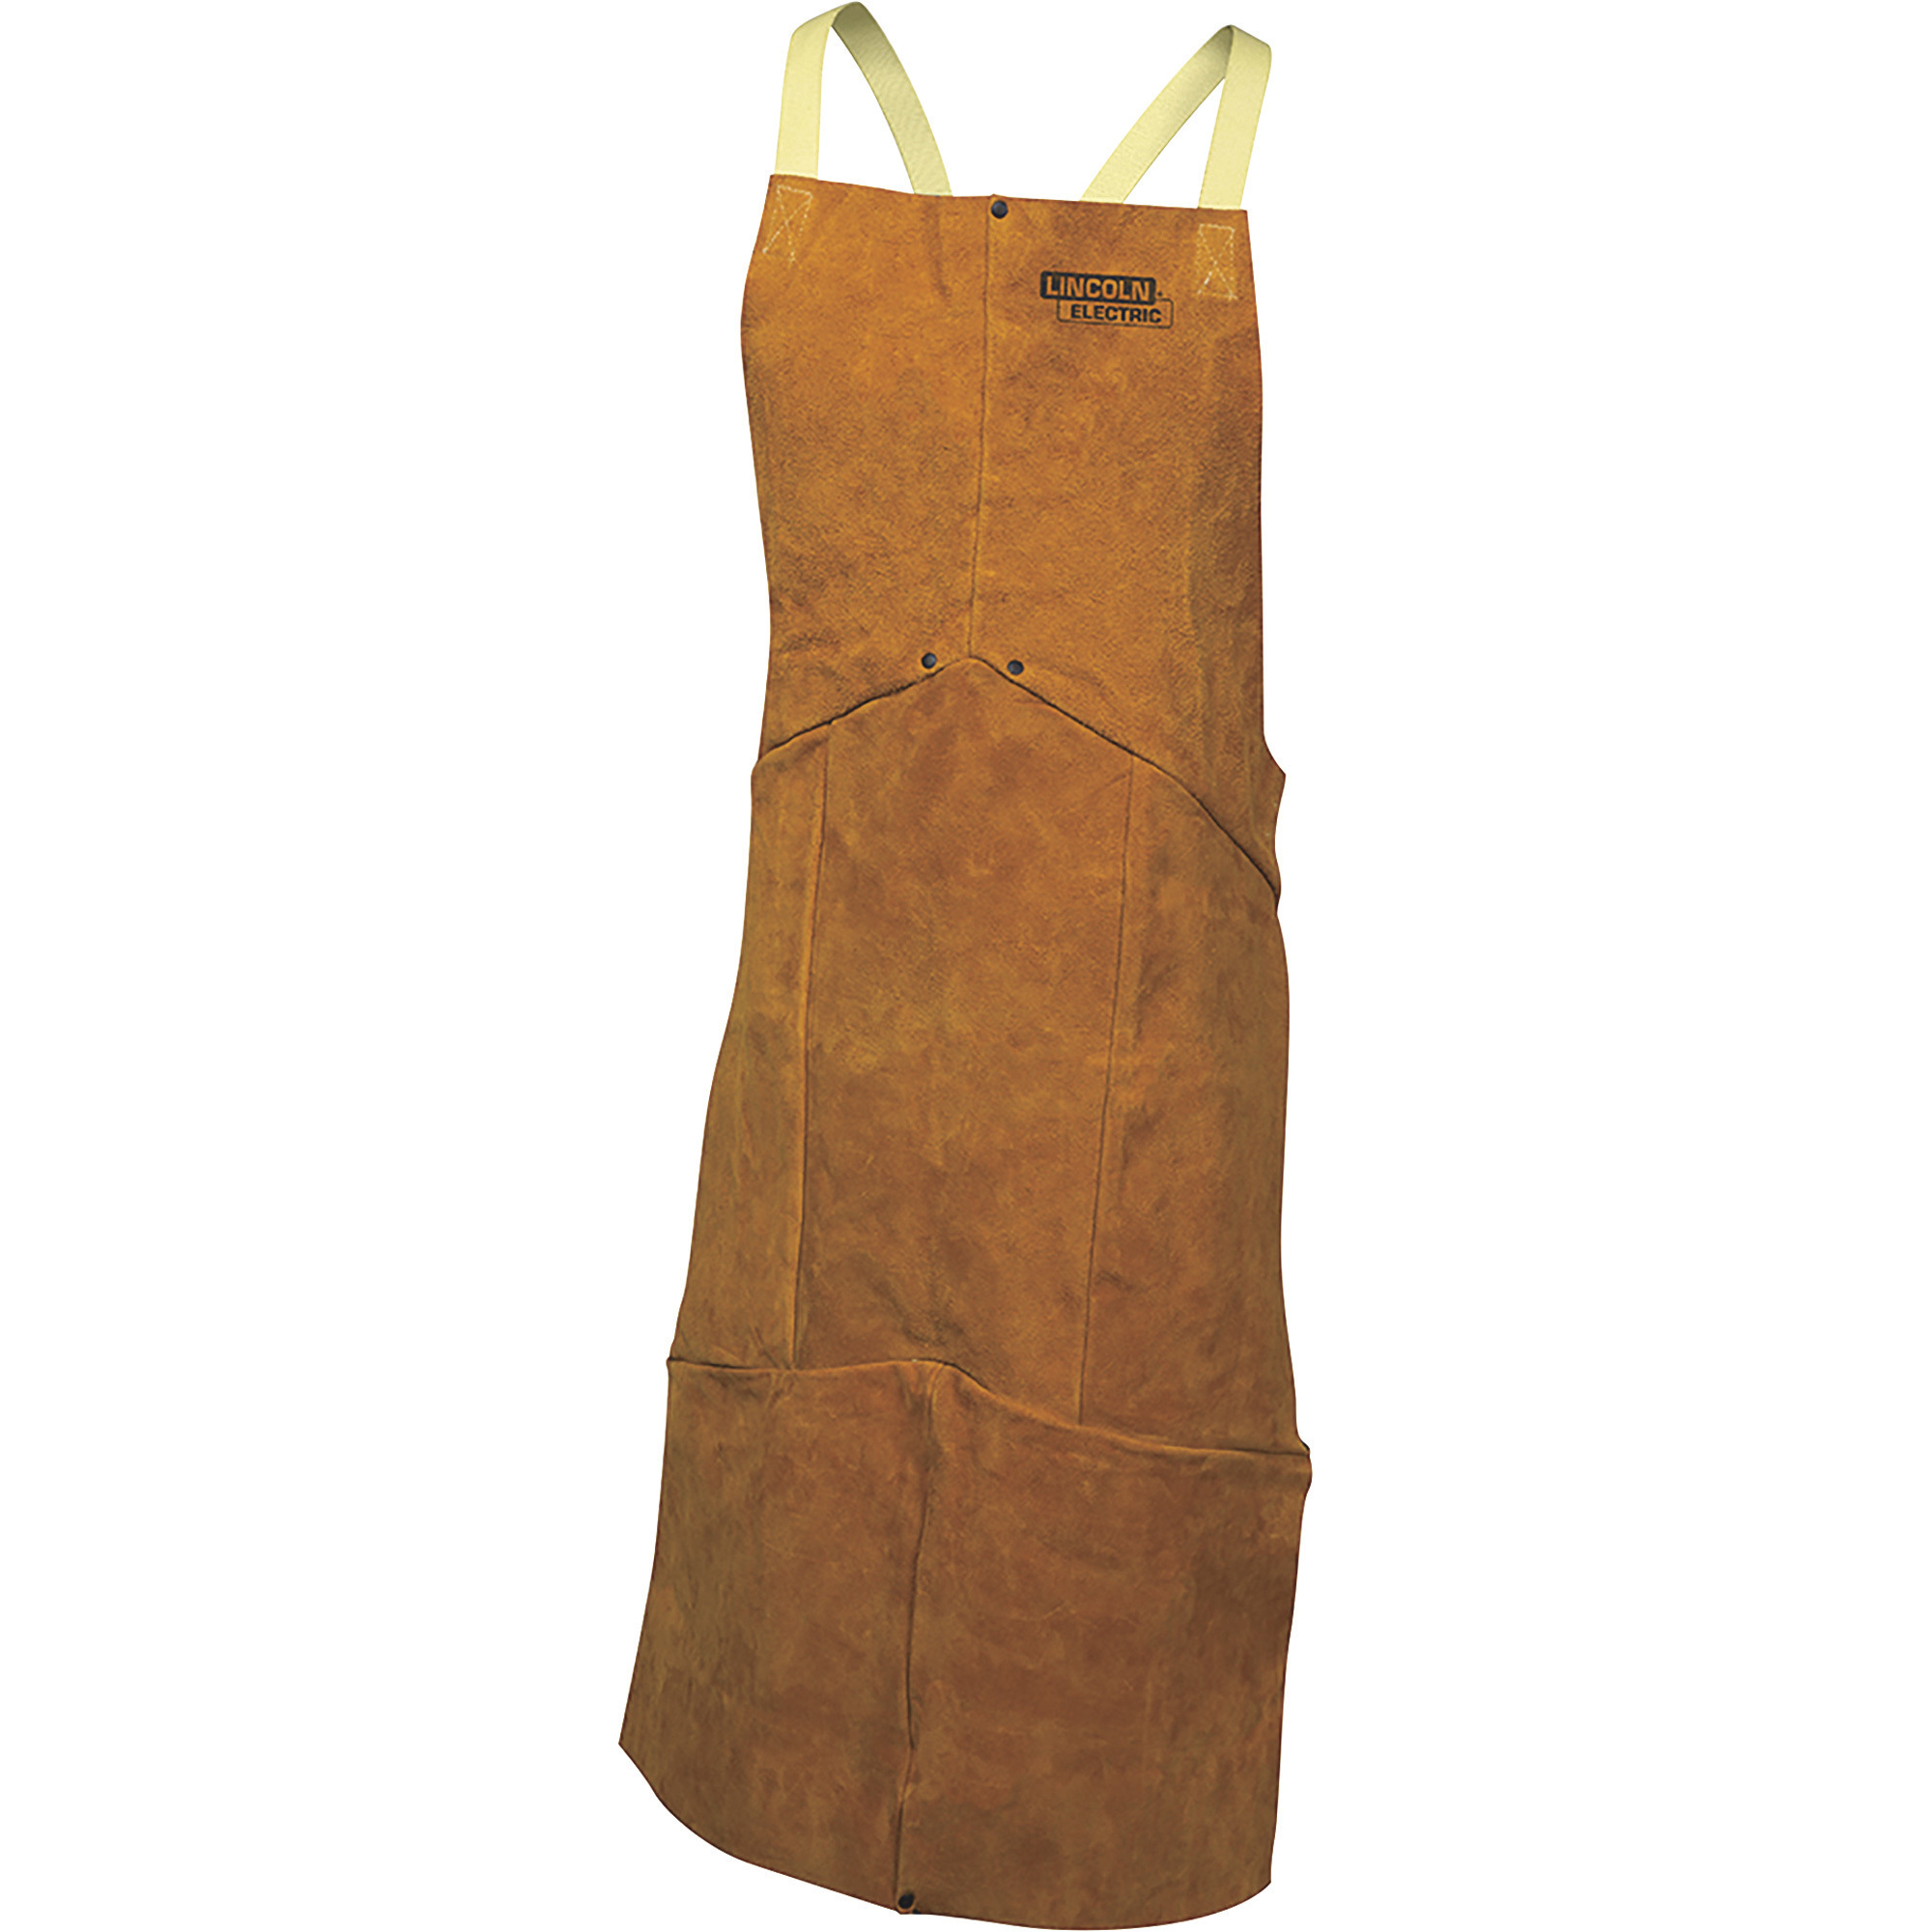 Lincoln Electric Flame-Retardant Leather Welding Apron, One-Size Fits All, Model KH804